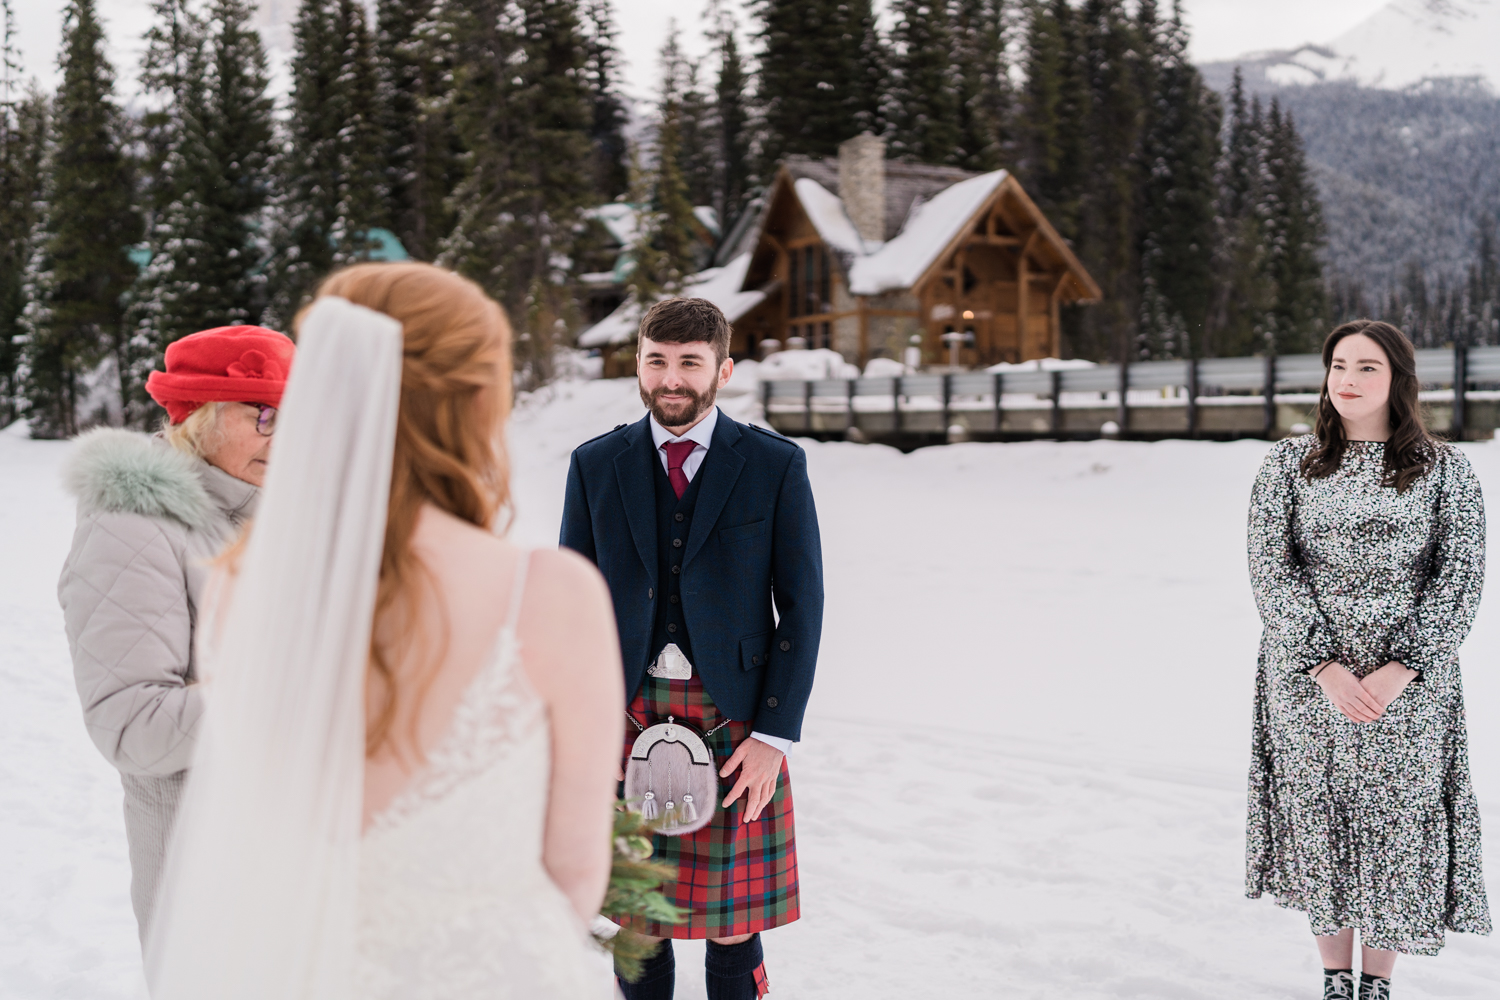 groom smiles at bride during a winter wedding ceremony at Emerald Lake